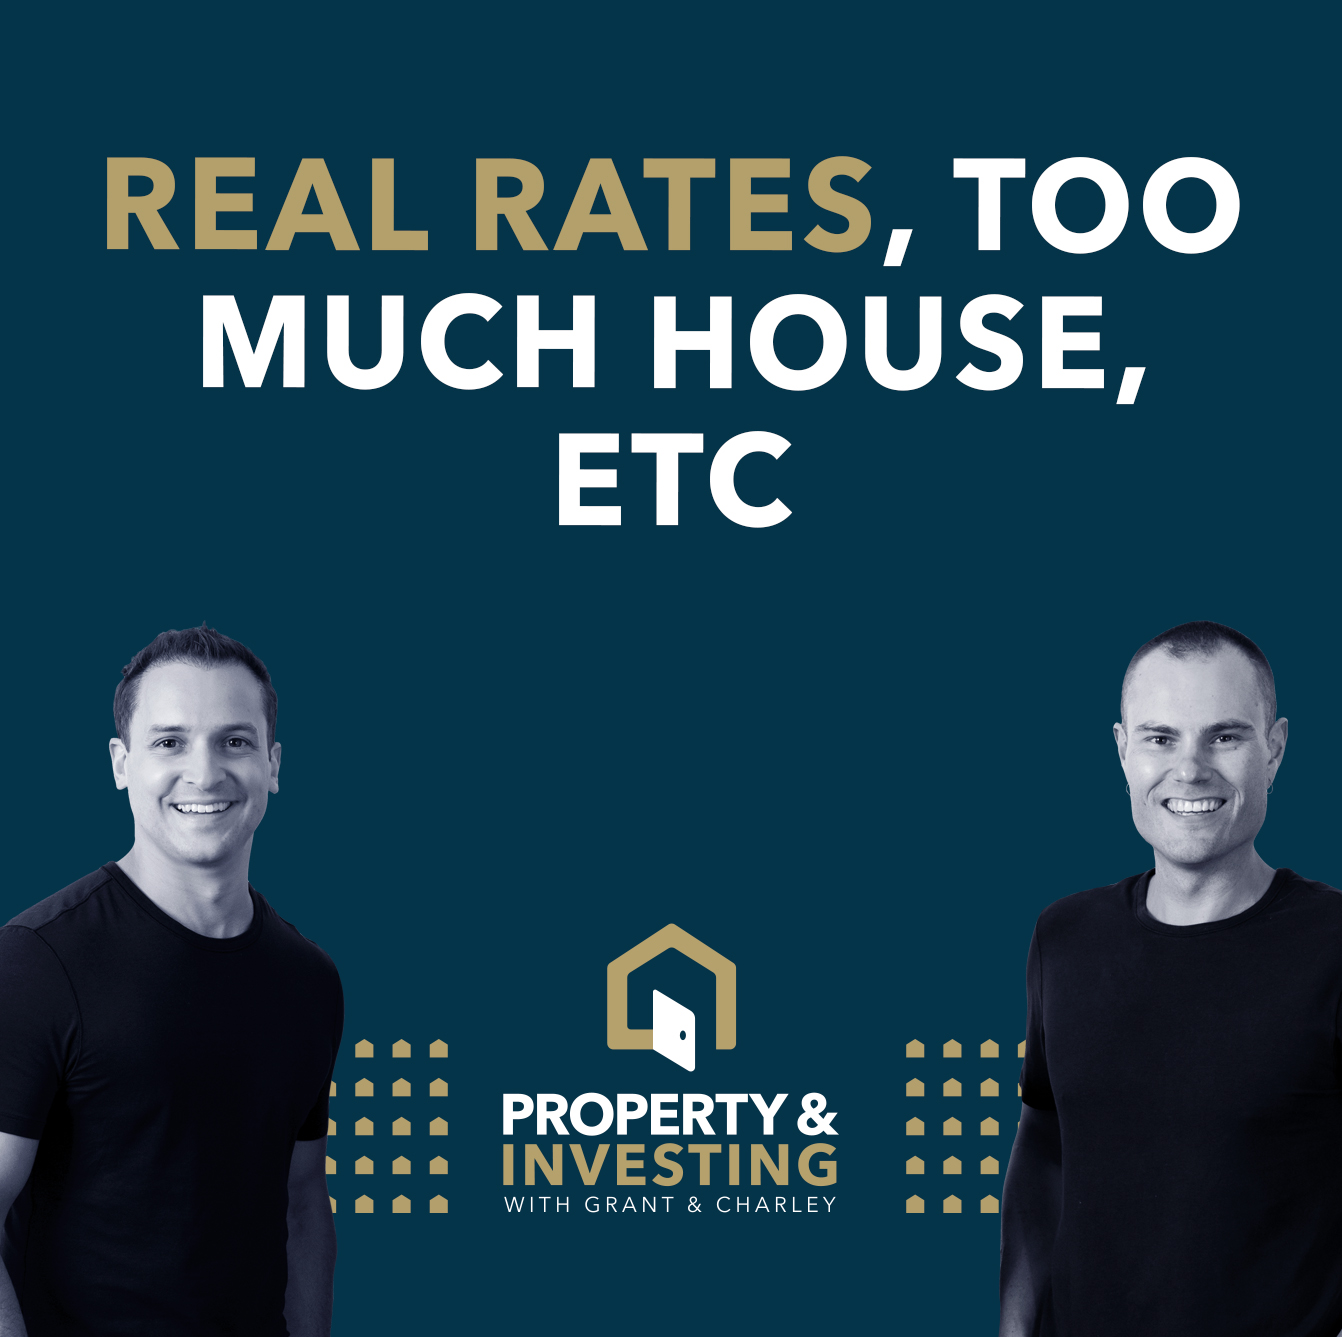 Real Rates, Too Much House, Etc